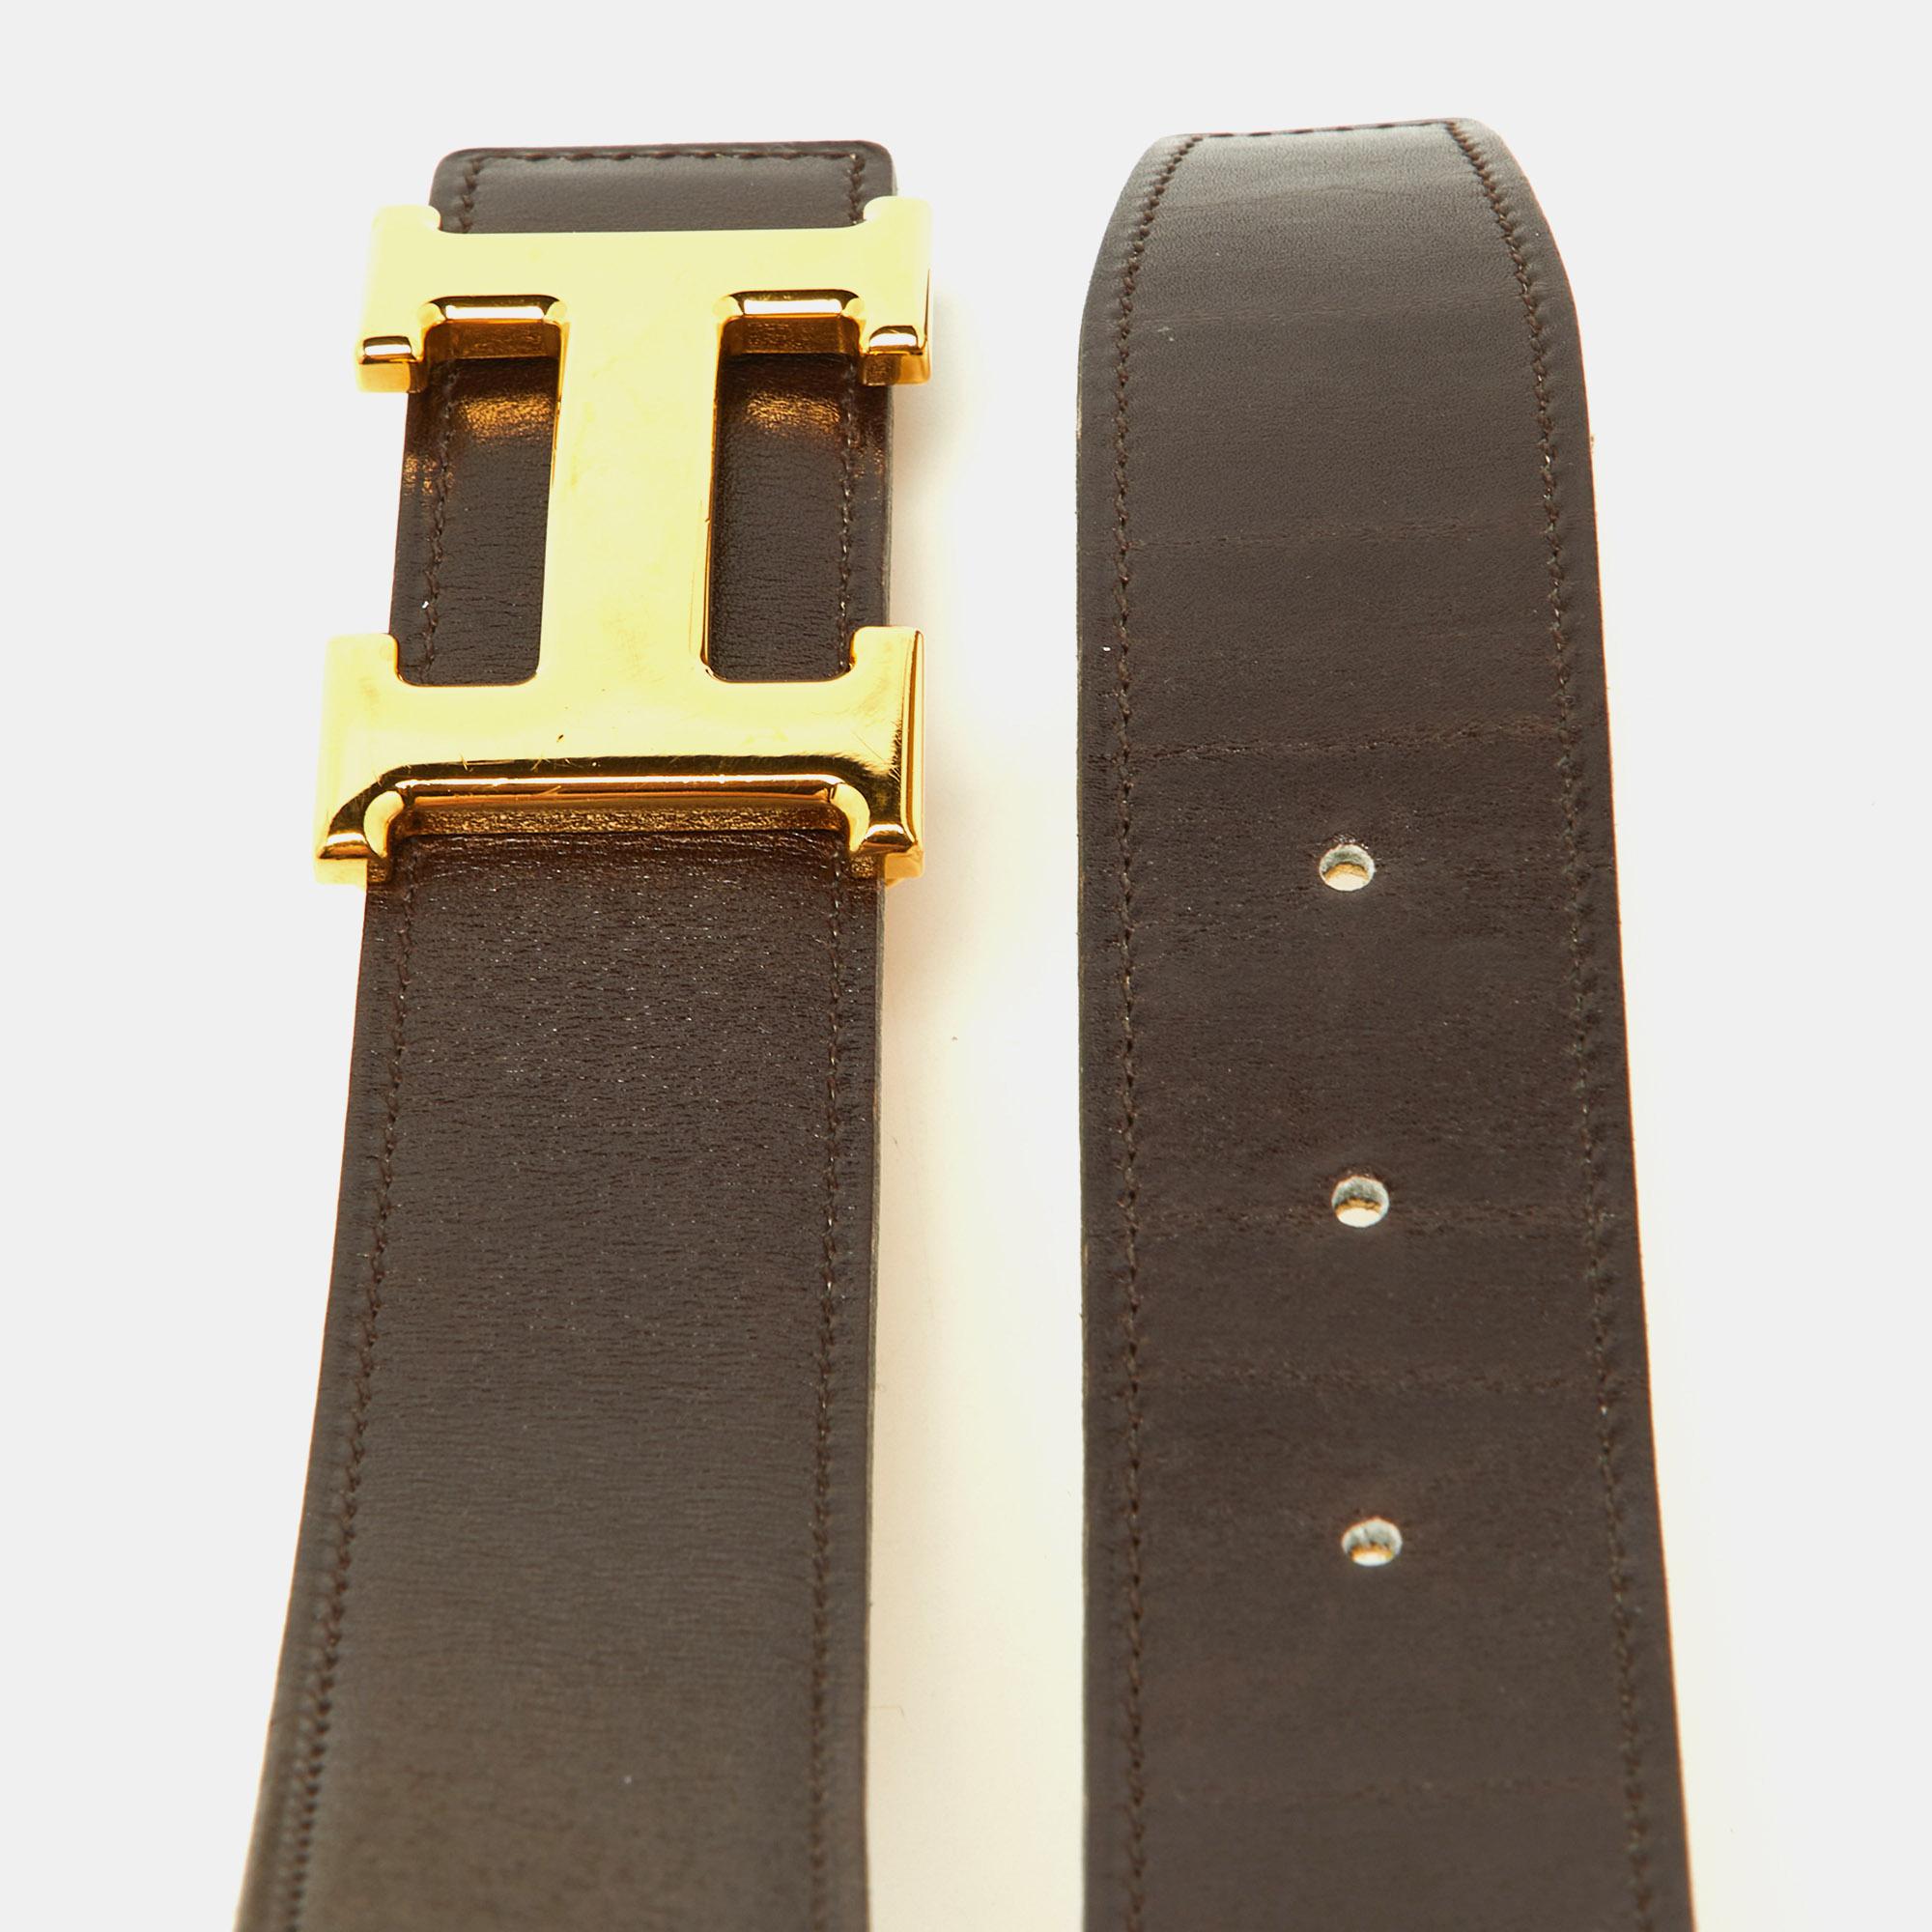 Elevate your style quotient with this Hermes belt. Crafted to perfection, it exudes sophistication and luxury, making it the ultimate accessory for those who demand both quality and fashion.

